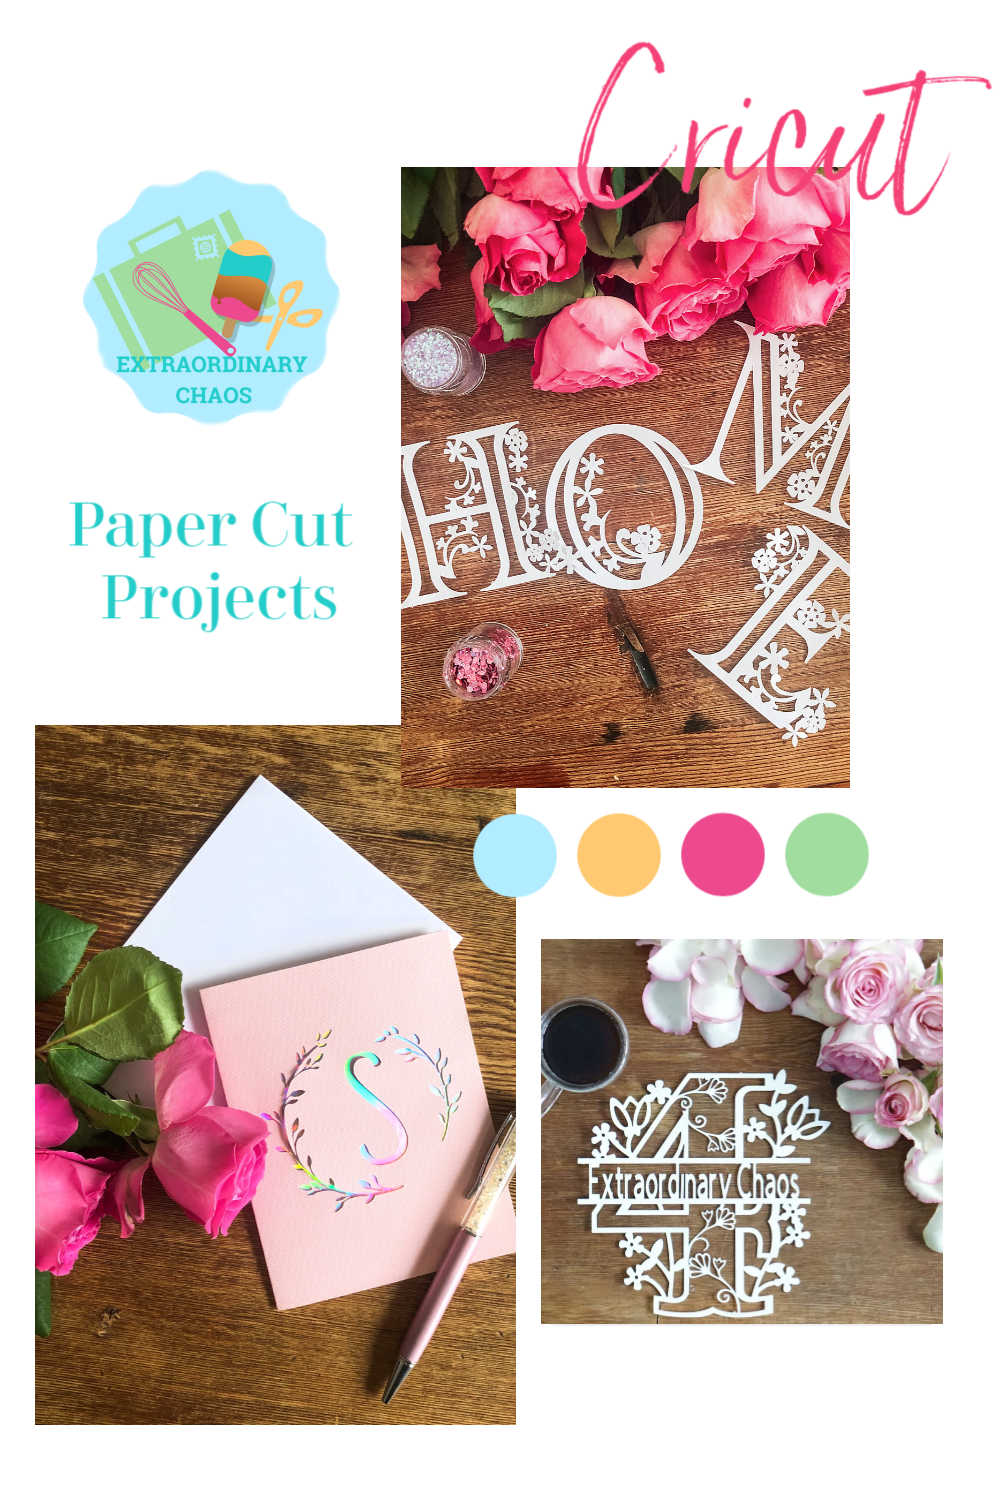 Paper Cutting Art Projects And Tutorials